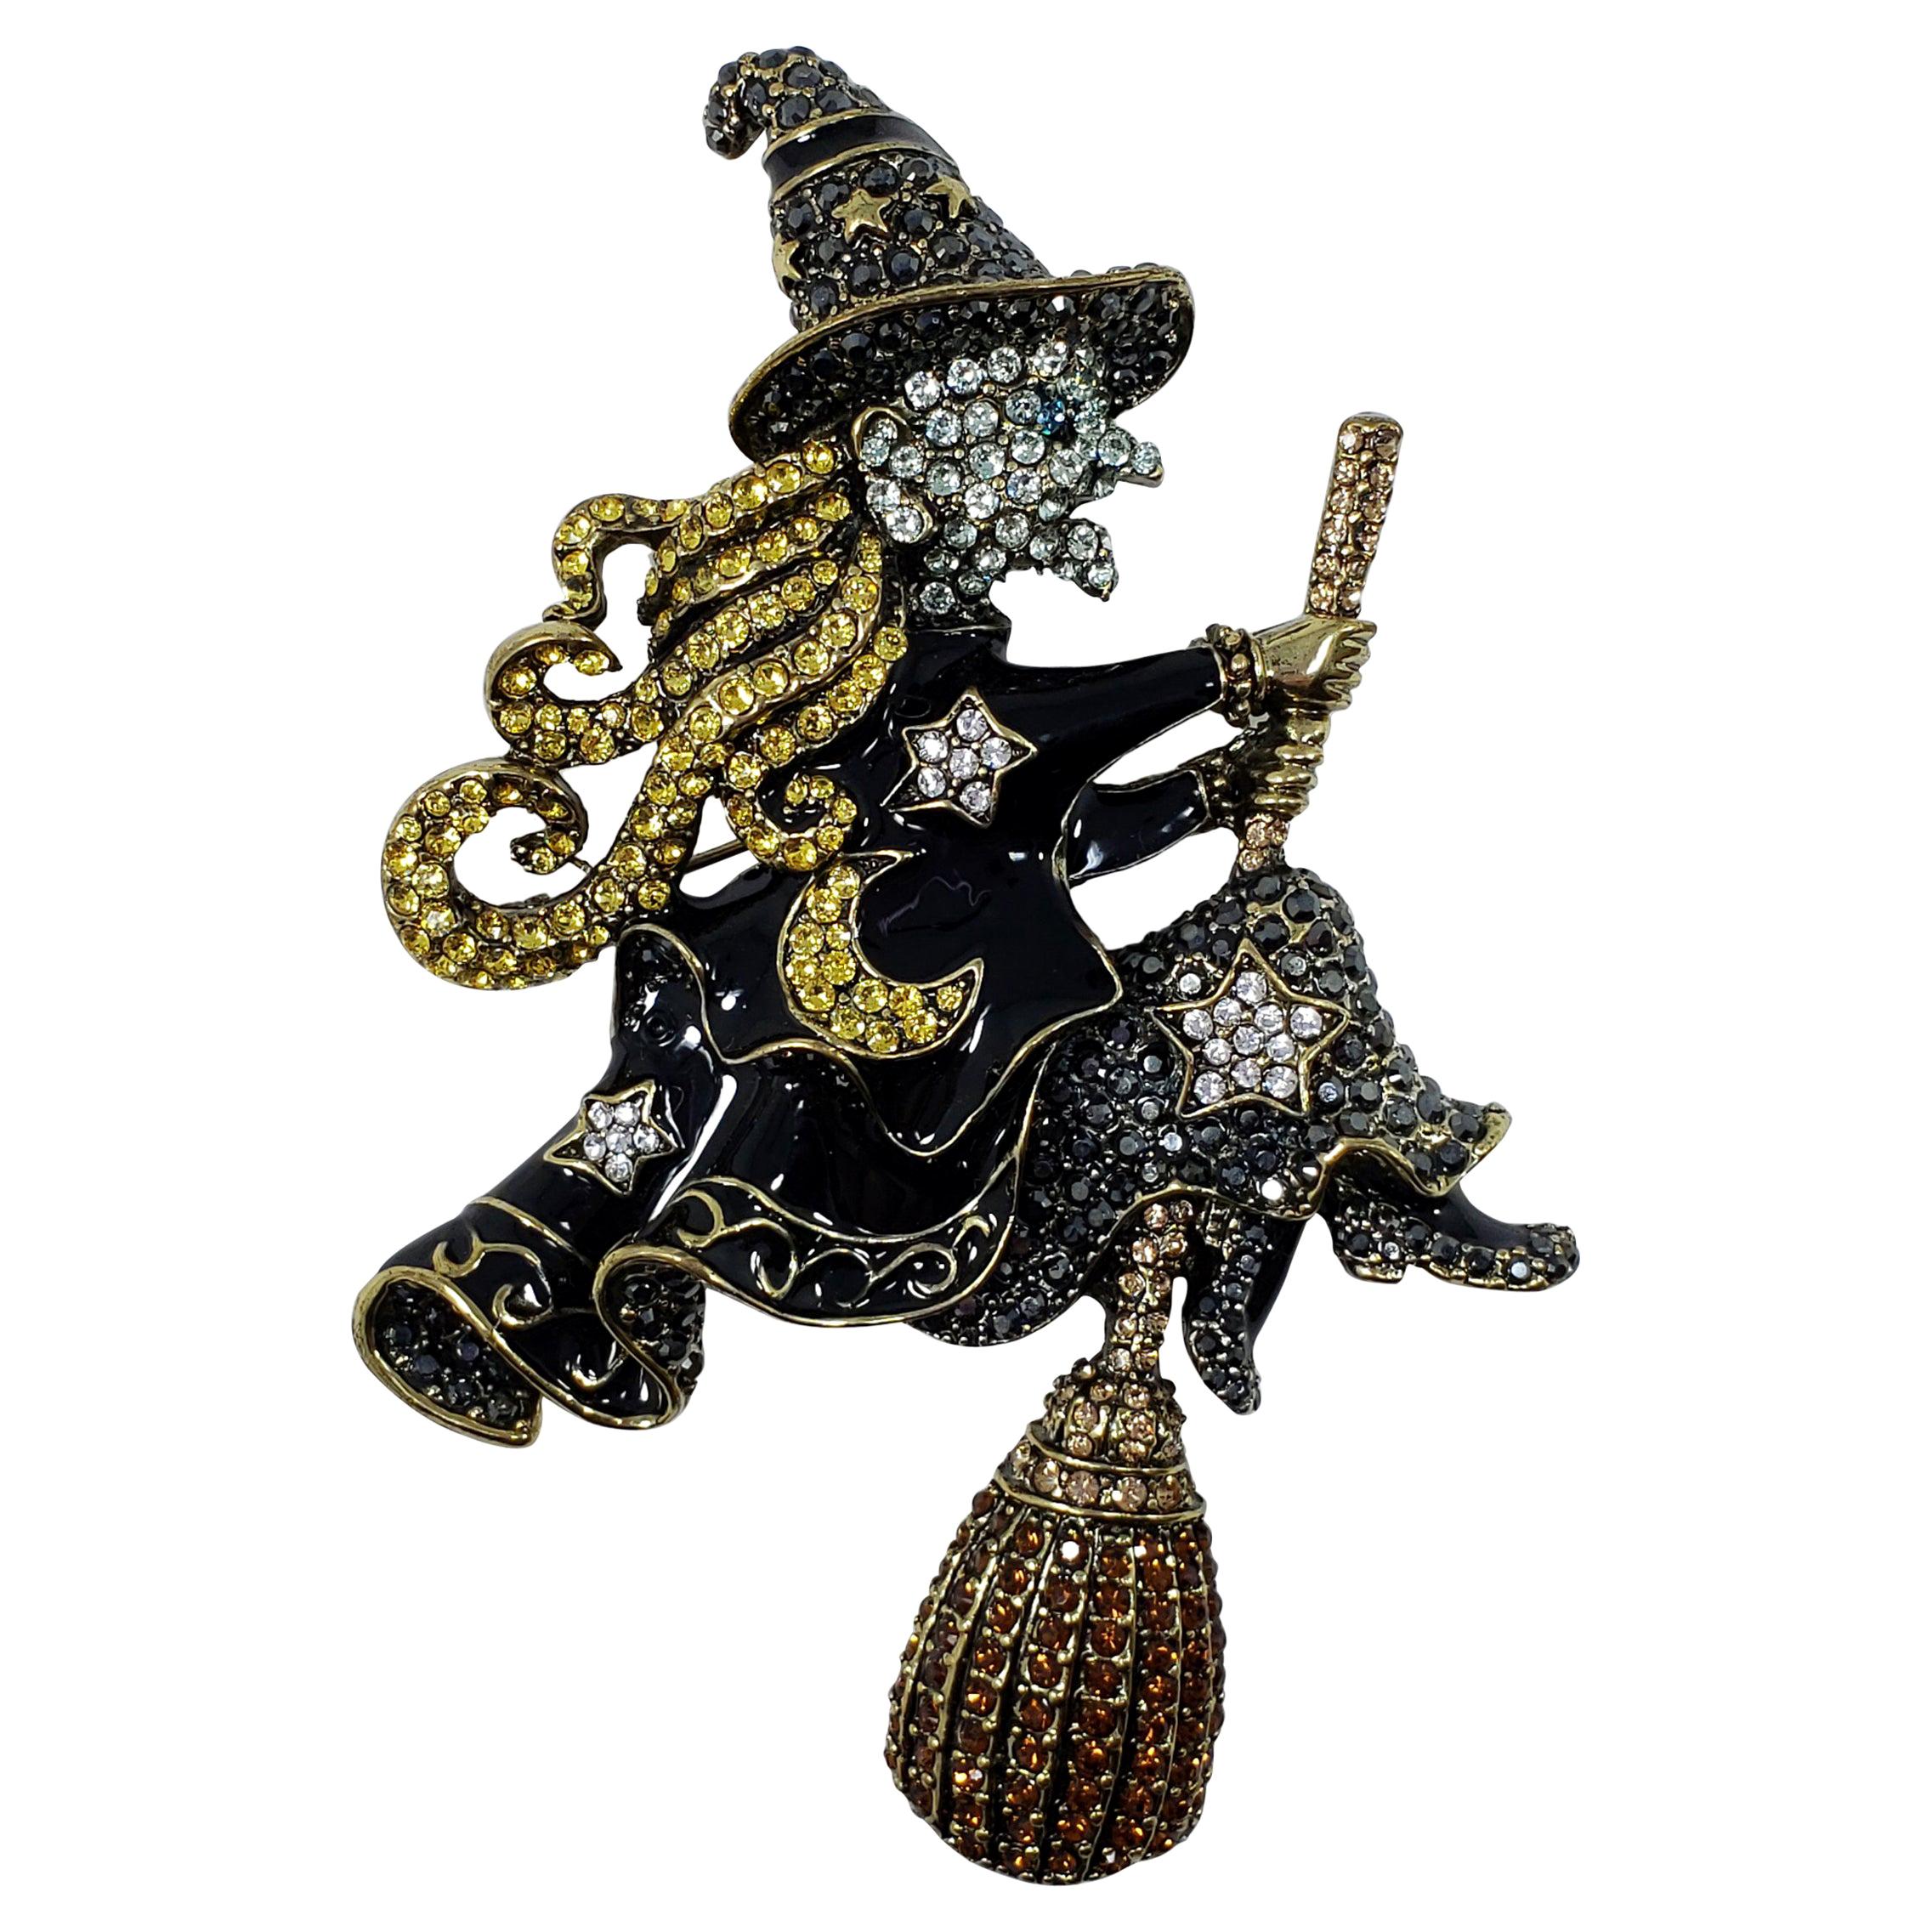 Heidi Daus "Heidi on the Stick" Pave Crystal and Enamel Witch Pin, Brooch